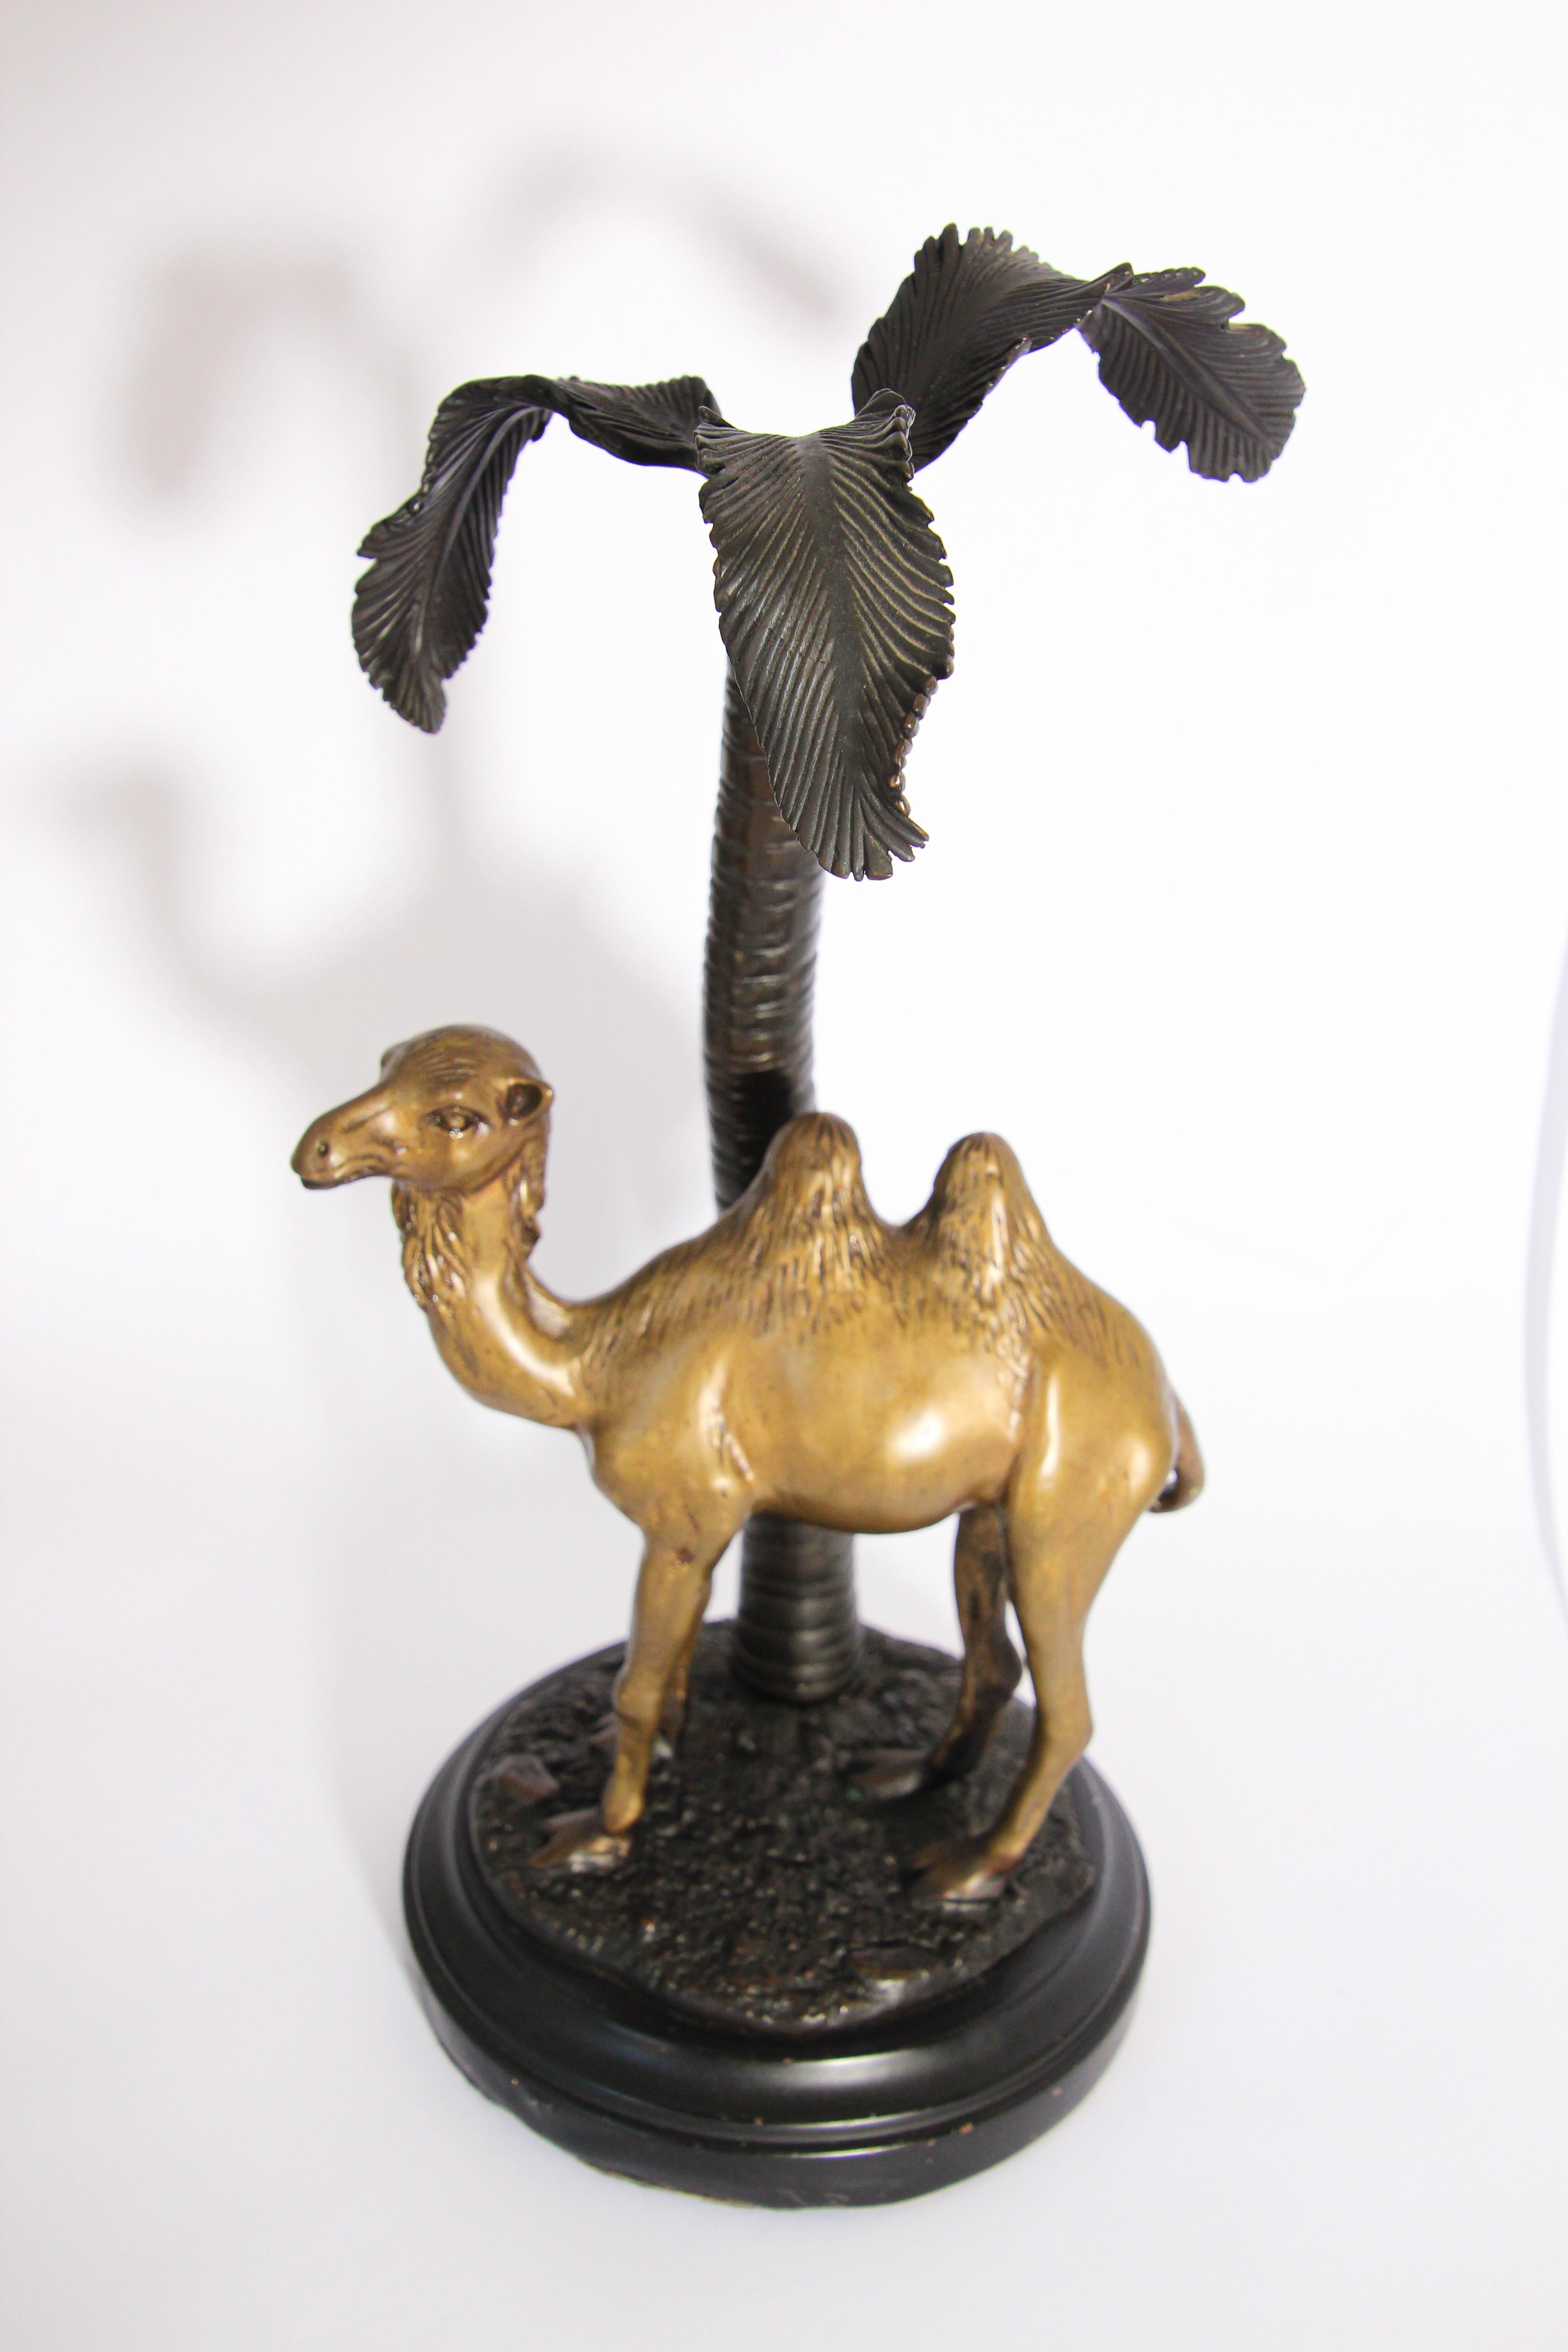 Beautiful Arabian orientalist style artwork of a brass metal camel standing under a bronze palm tree.
The patina finish is stunning in its deep, rich tones for the tree and base, the camel is in cast brass.
The group was designed to be a table